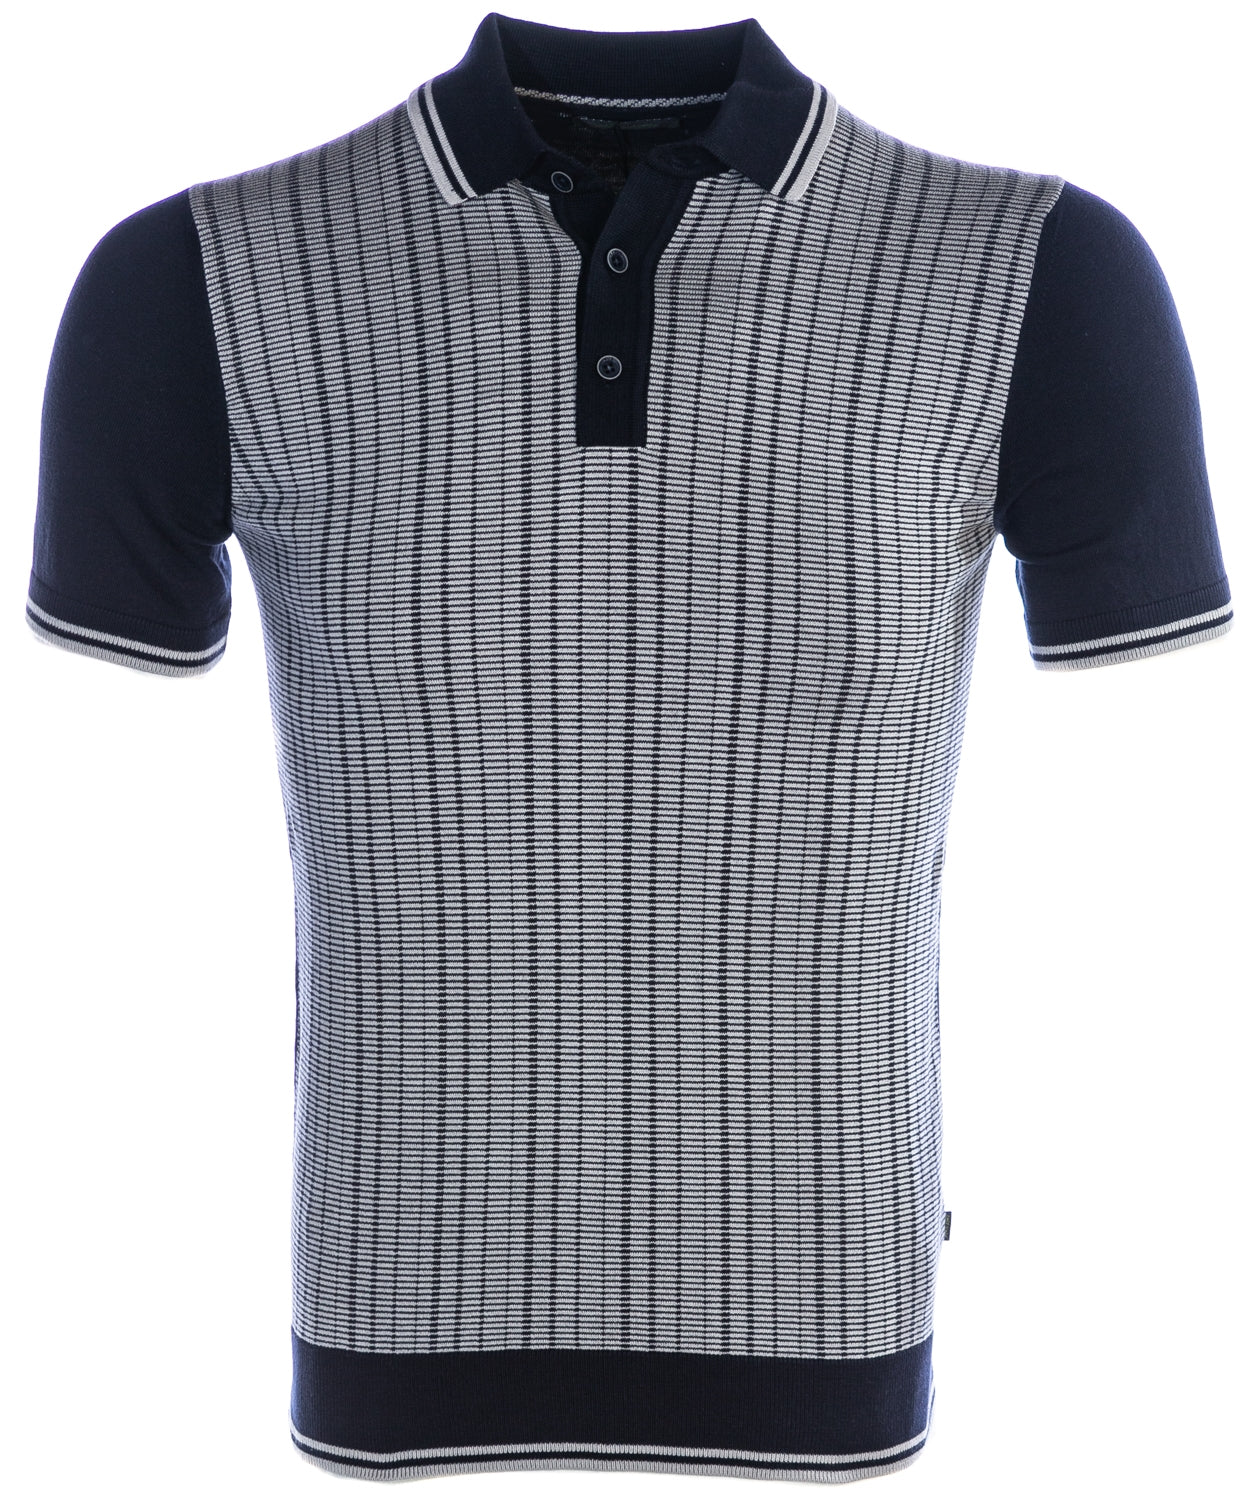 Remus Uomo Abstract Stripe Front Knitted Polo Shirt in Navy & Grey